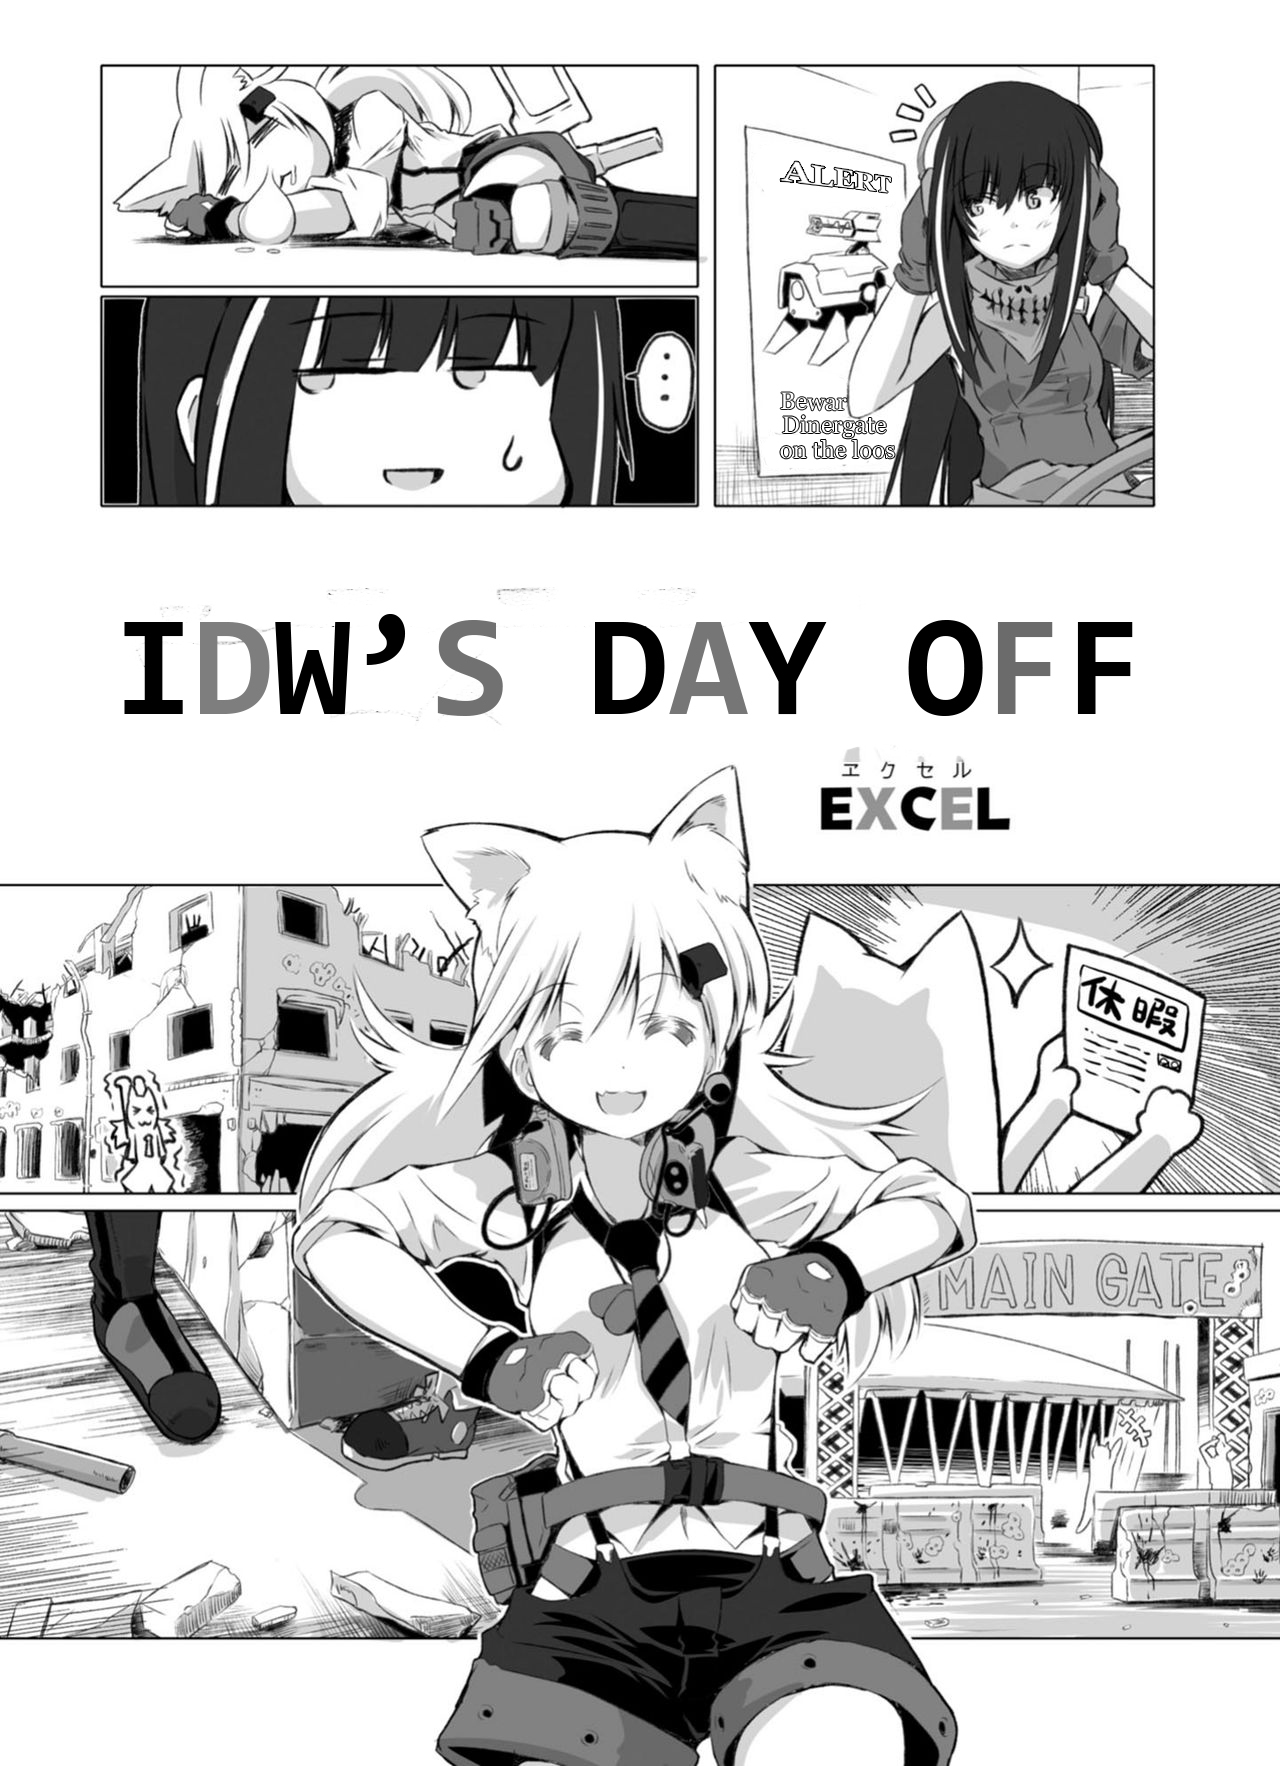 Dolls Frontline Comic anthology Vol. 1 Ch. 5 IDW's Day Off